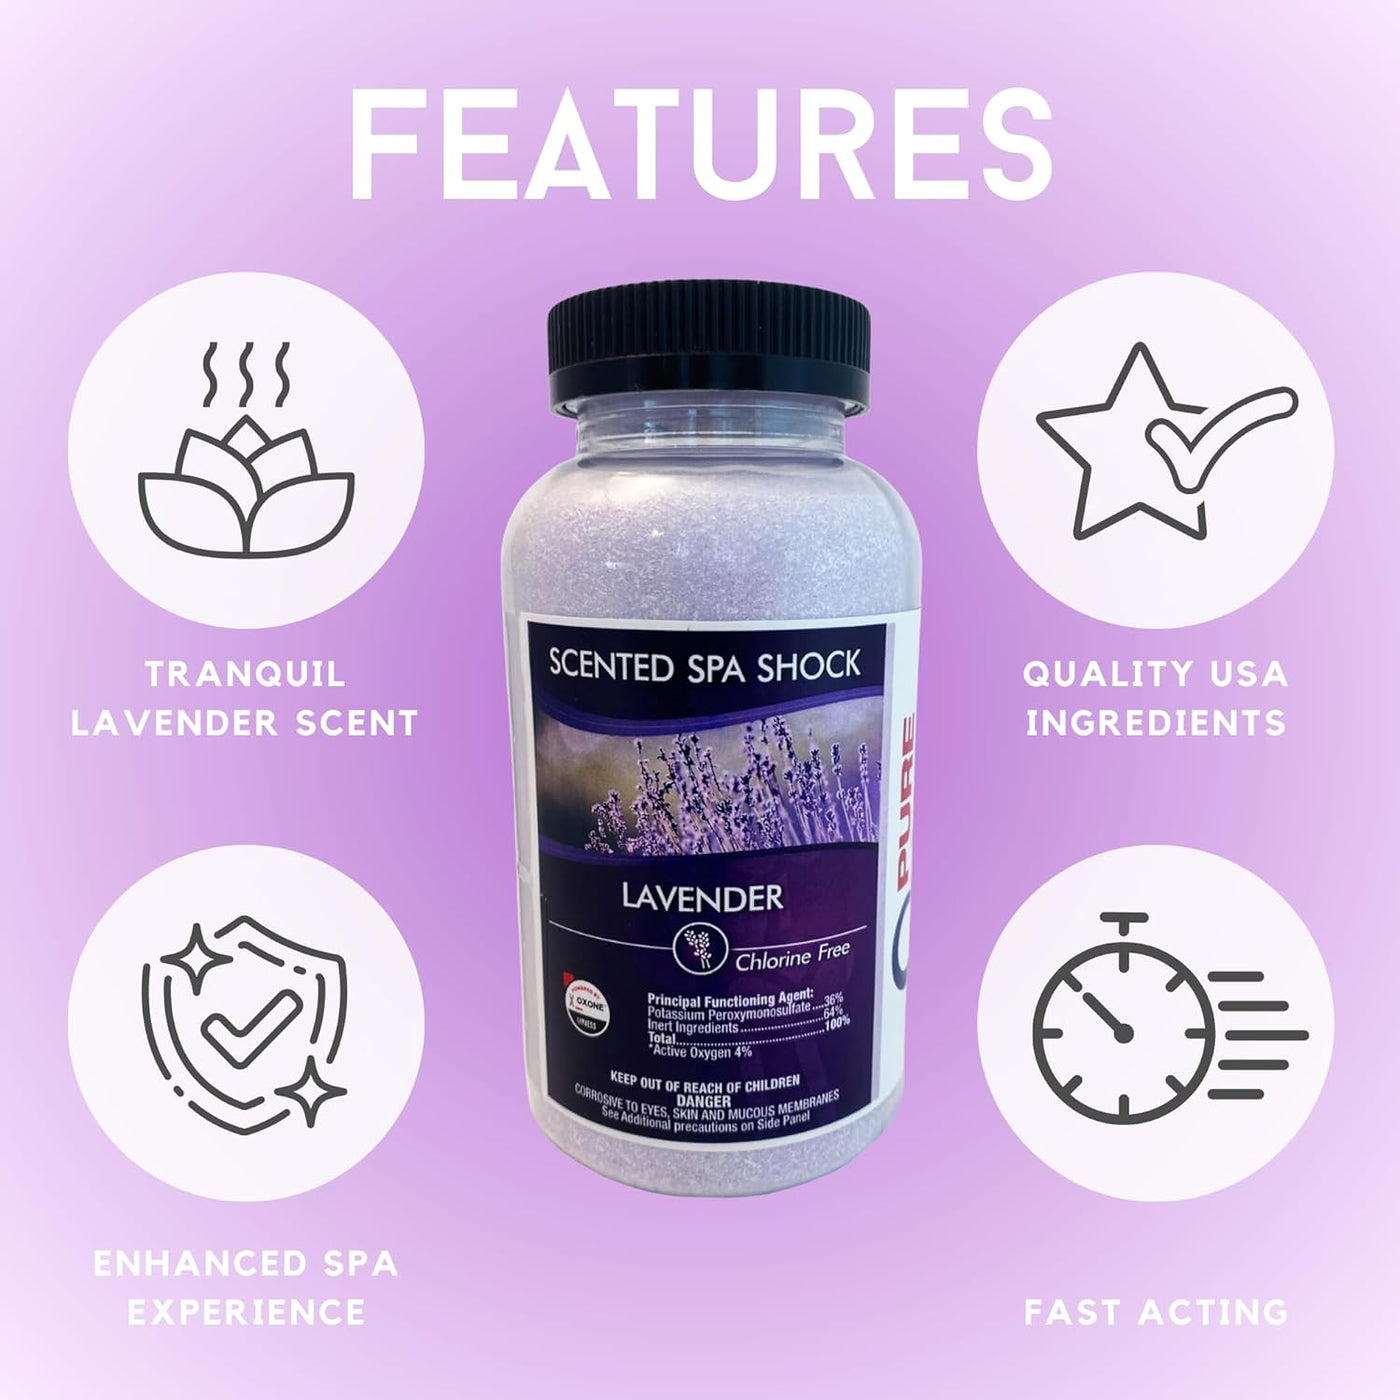 Pure and Simple Fragrance Spa Shock Lavender 1.875 lbs.